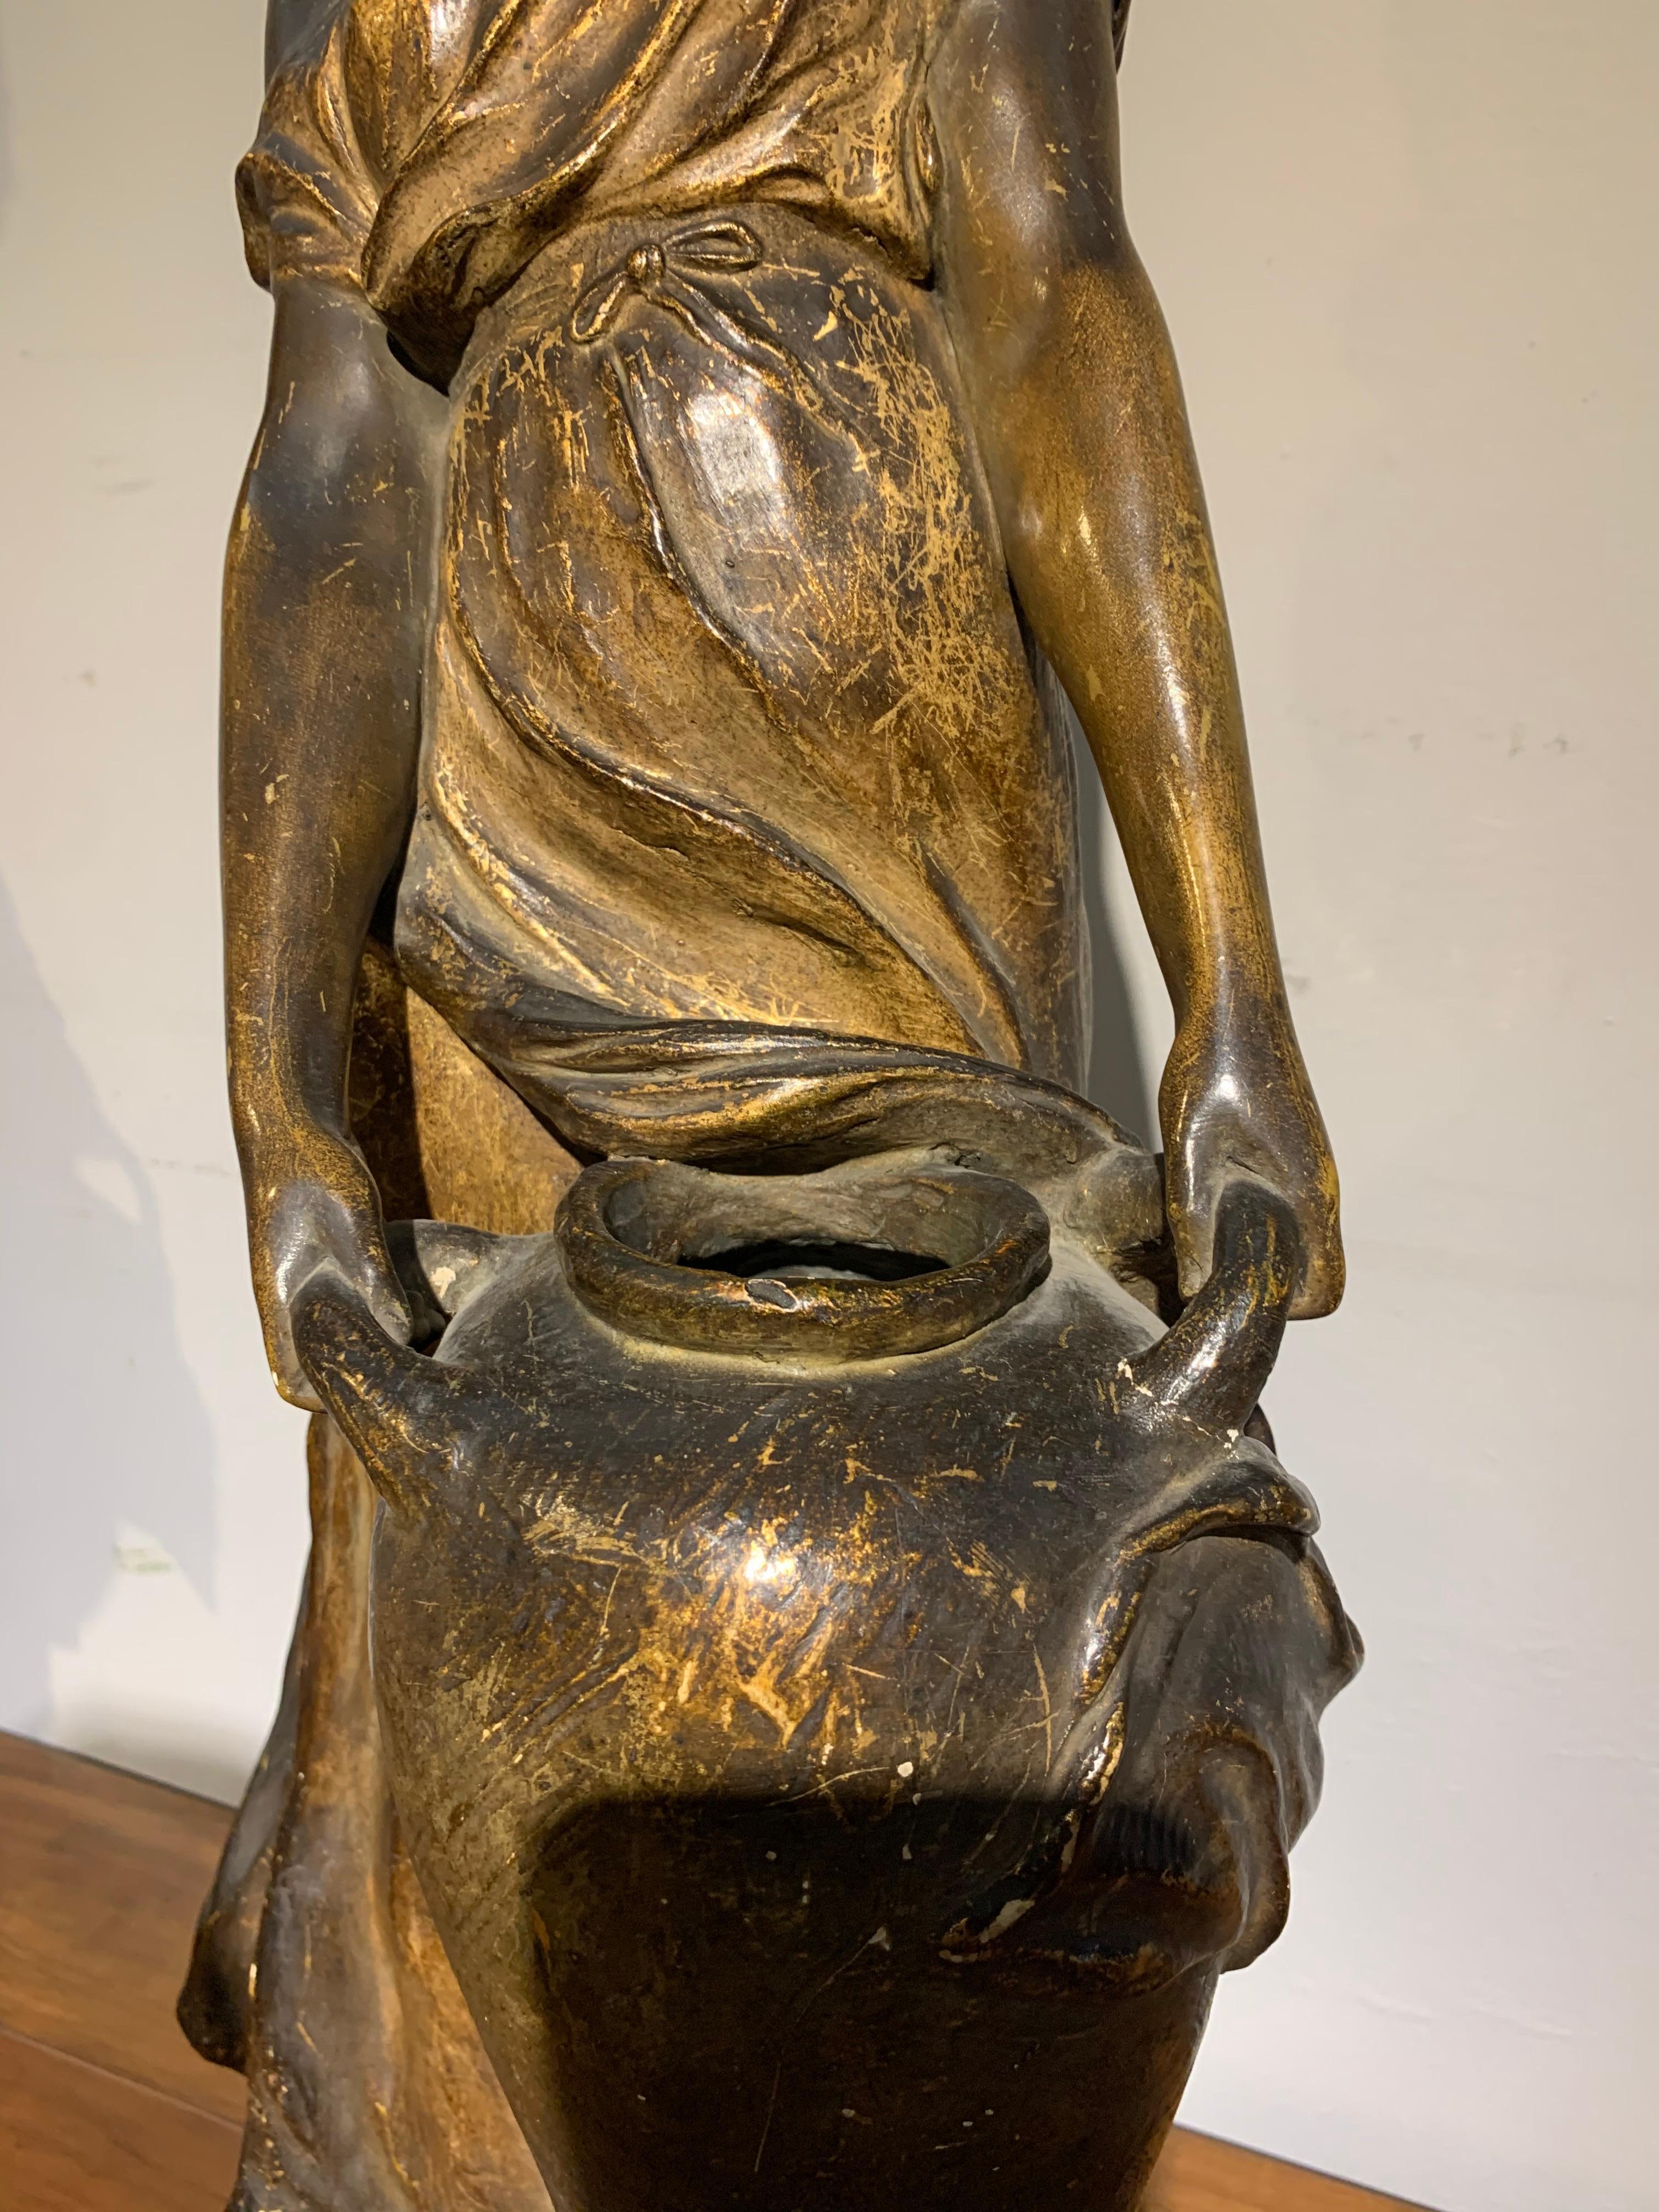 19th Century Large Terracotta Sculpture by Frederic Goldscheider In Fair Condition For Sale In Honiton, Devon